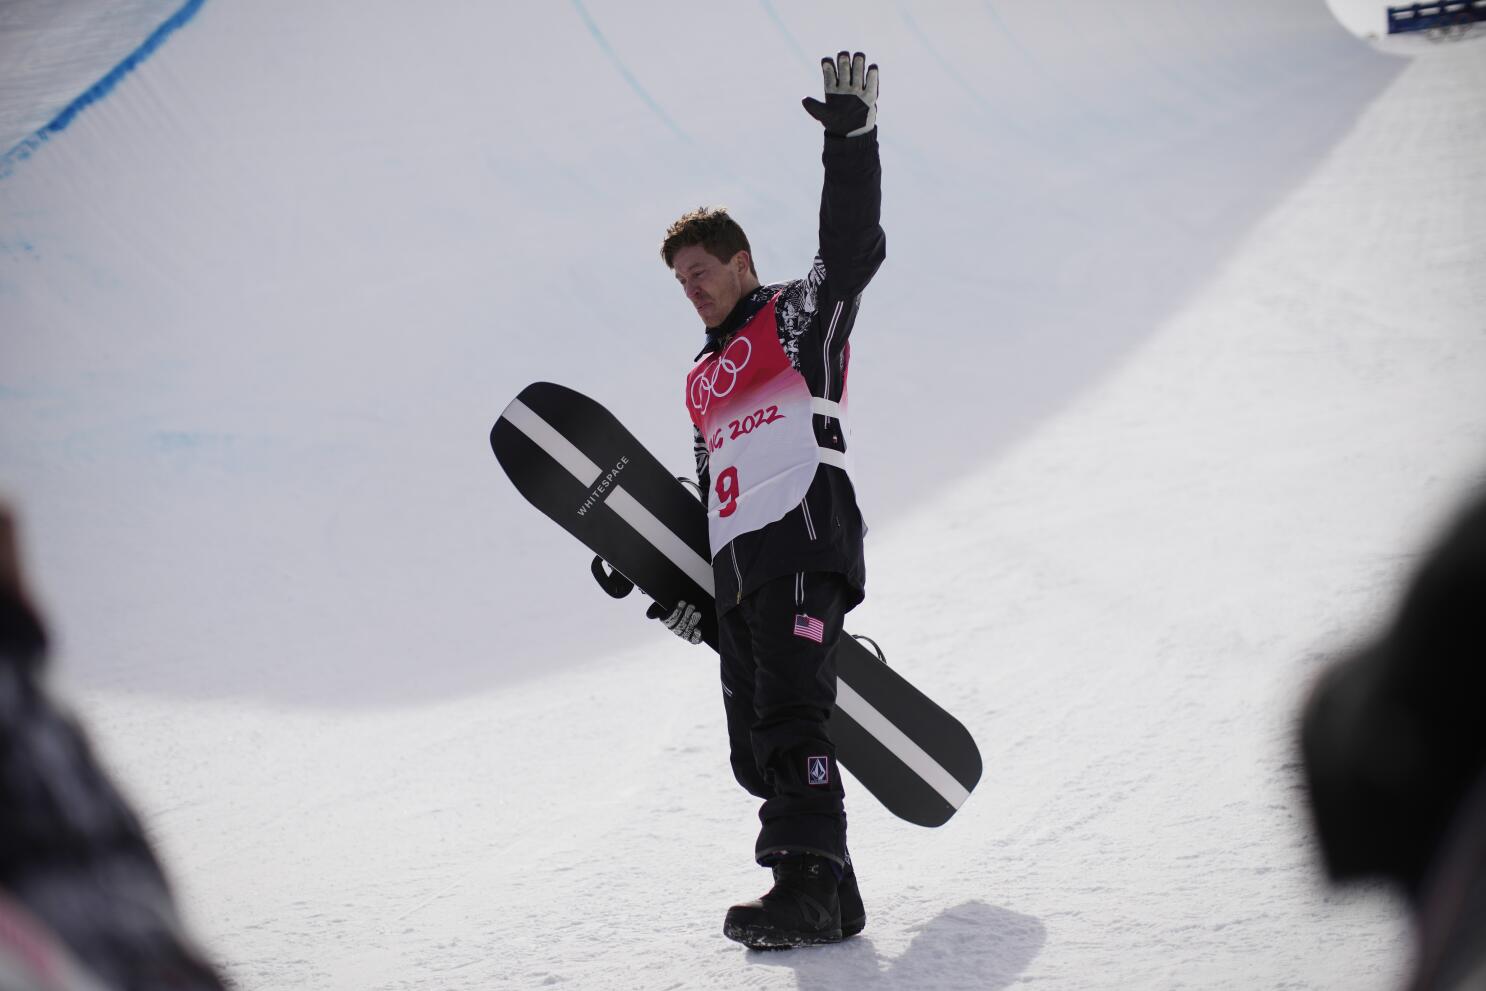 Shaun White looking to one last medal at 2022 Olympics - Los Angeles Times